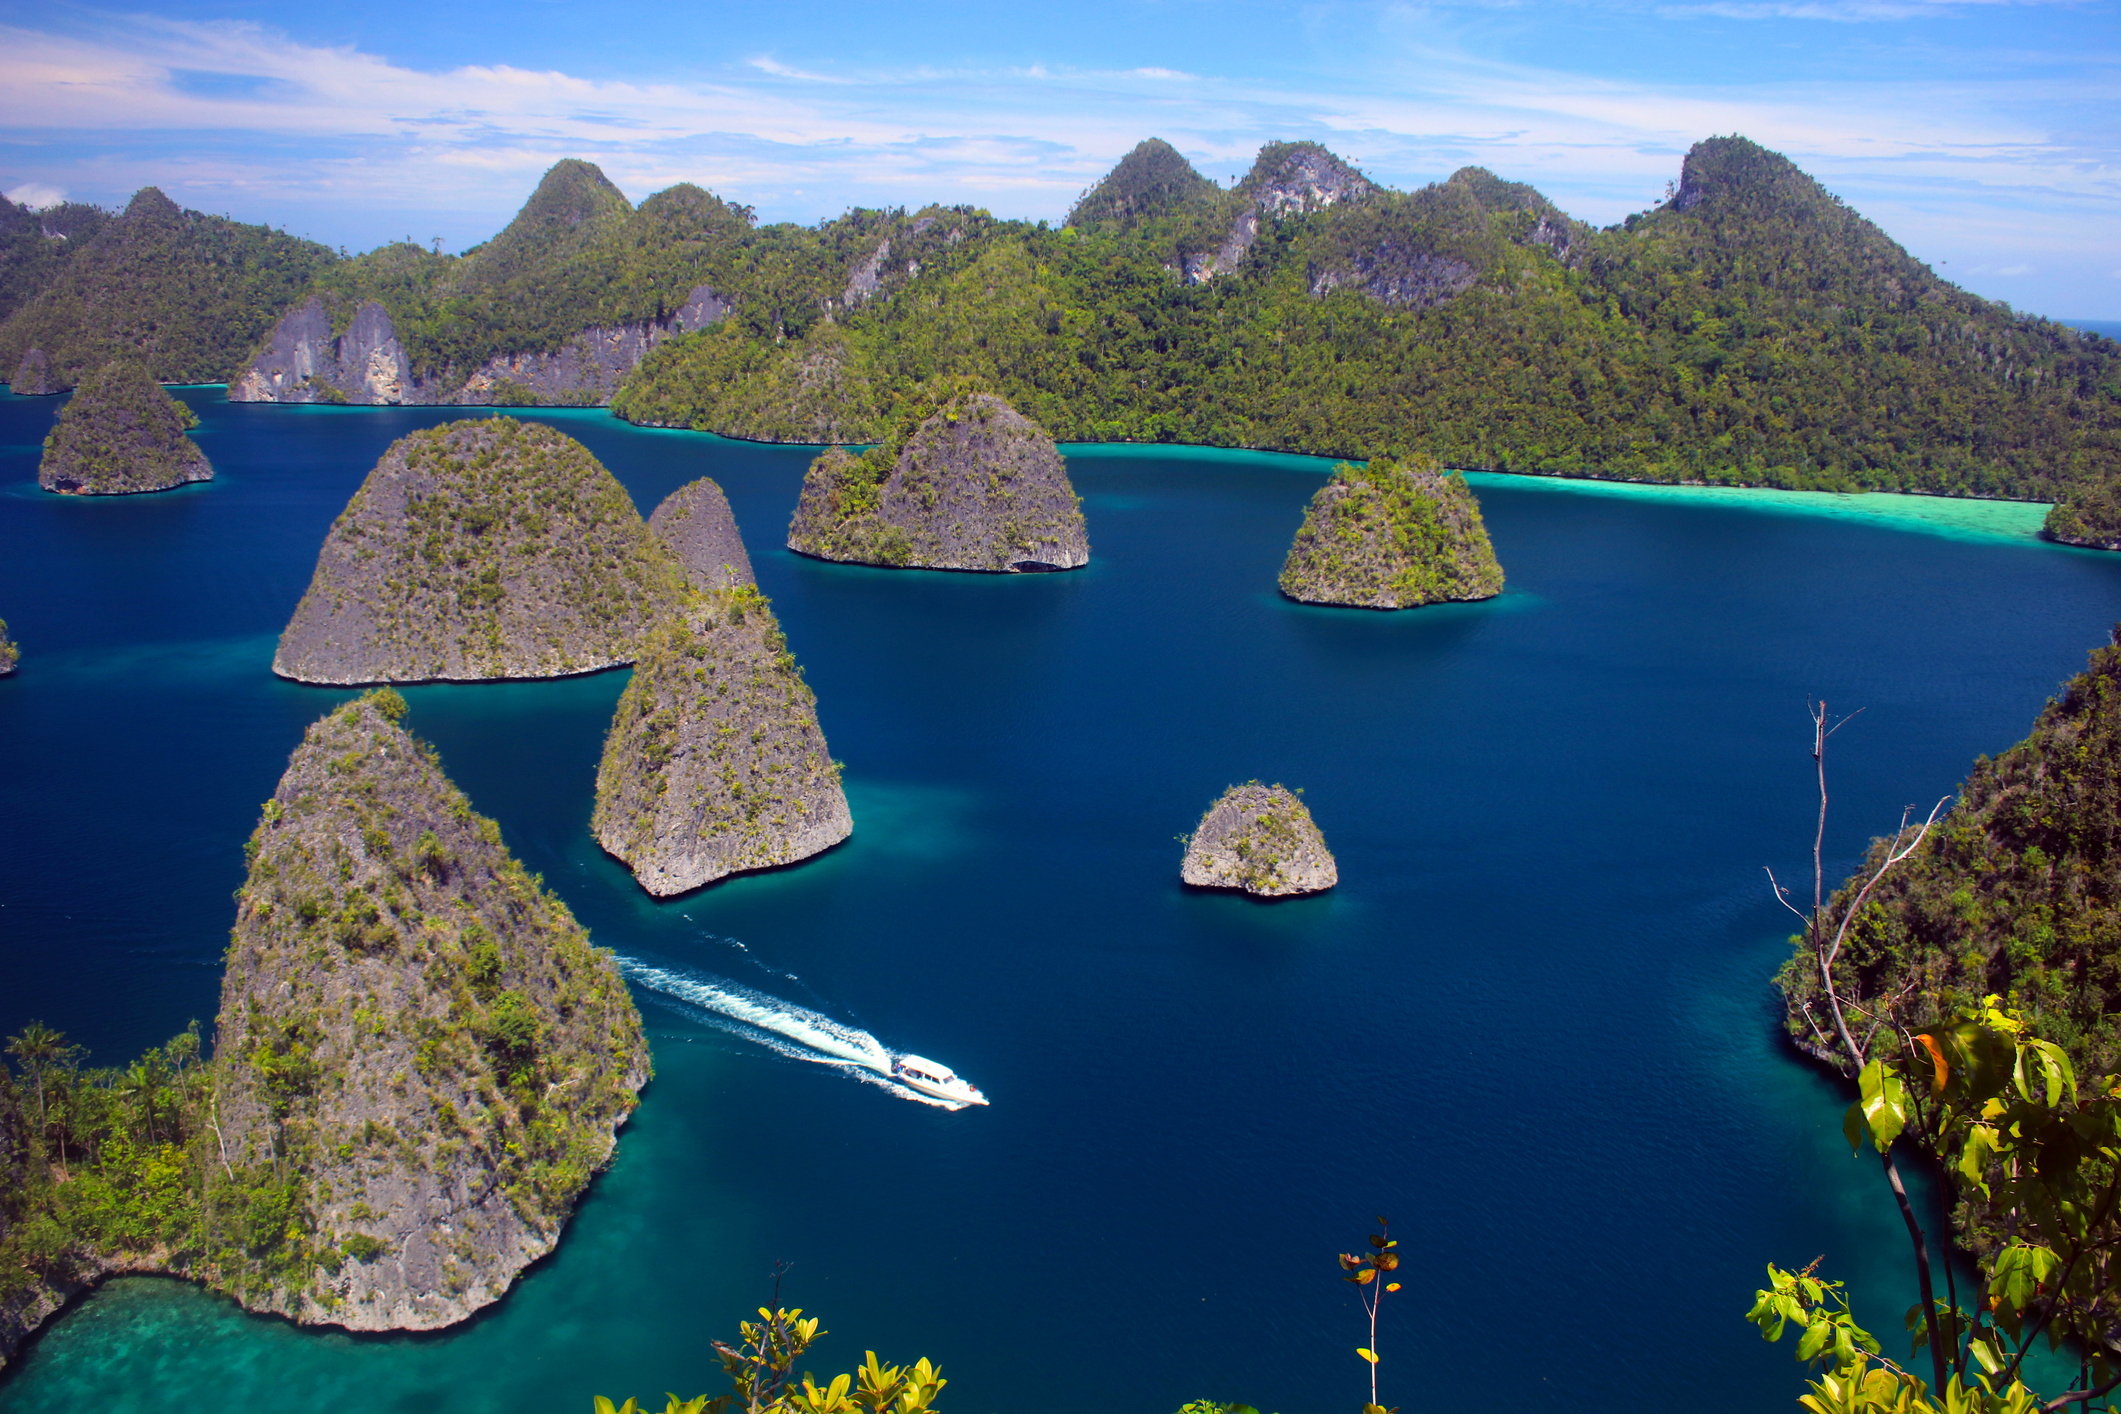 Raja Ampat, Indonesia (Mike lyvers––Getty Images)